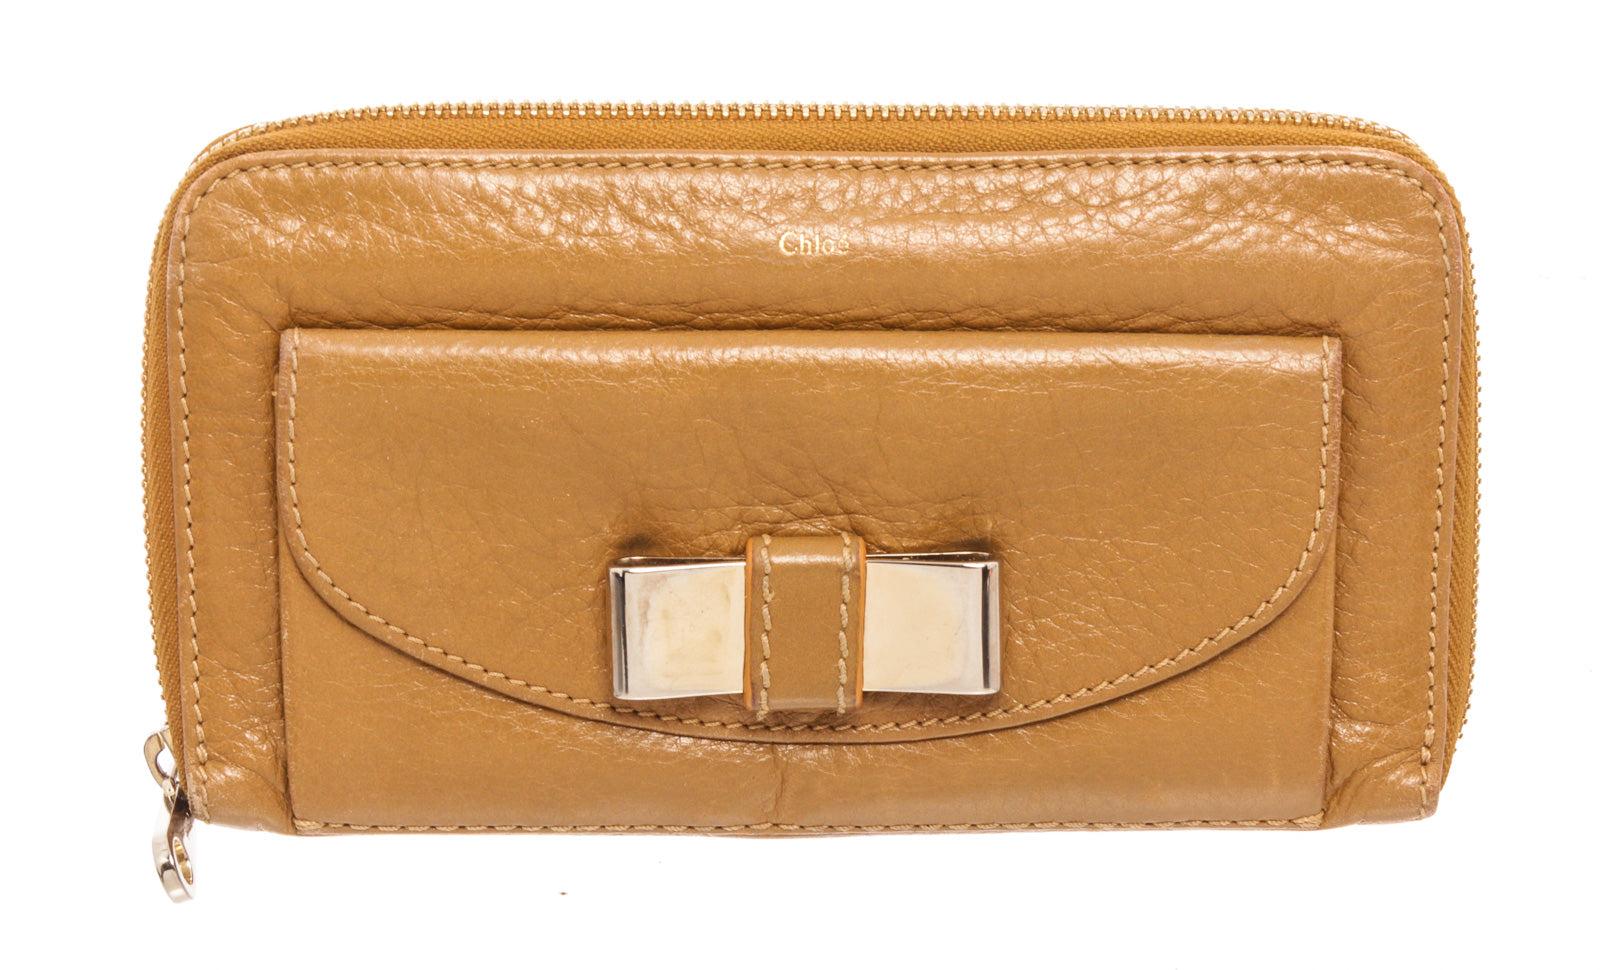 Chloe Brown Leather Lily Zip Wallet with gold-tone hardware, single exterior flap pocket, three interior compartments; one with zip closure, tonal leather and grosgrain lining, dual bill compartments, eight card slots and zip-around closure.
33175MSC